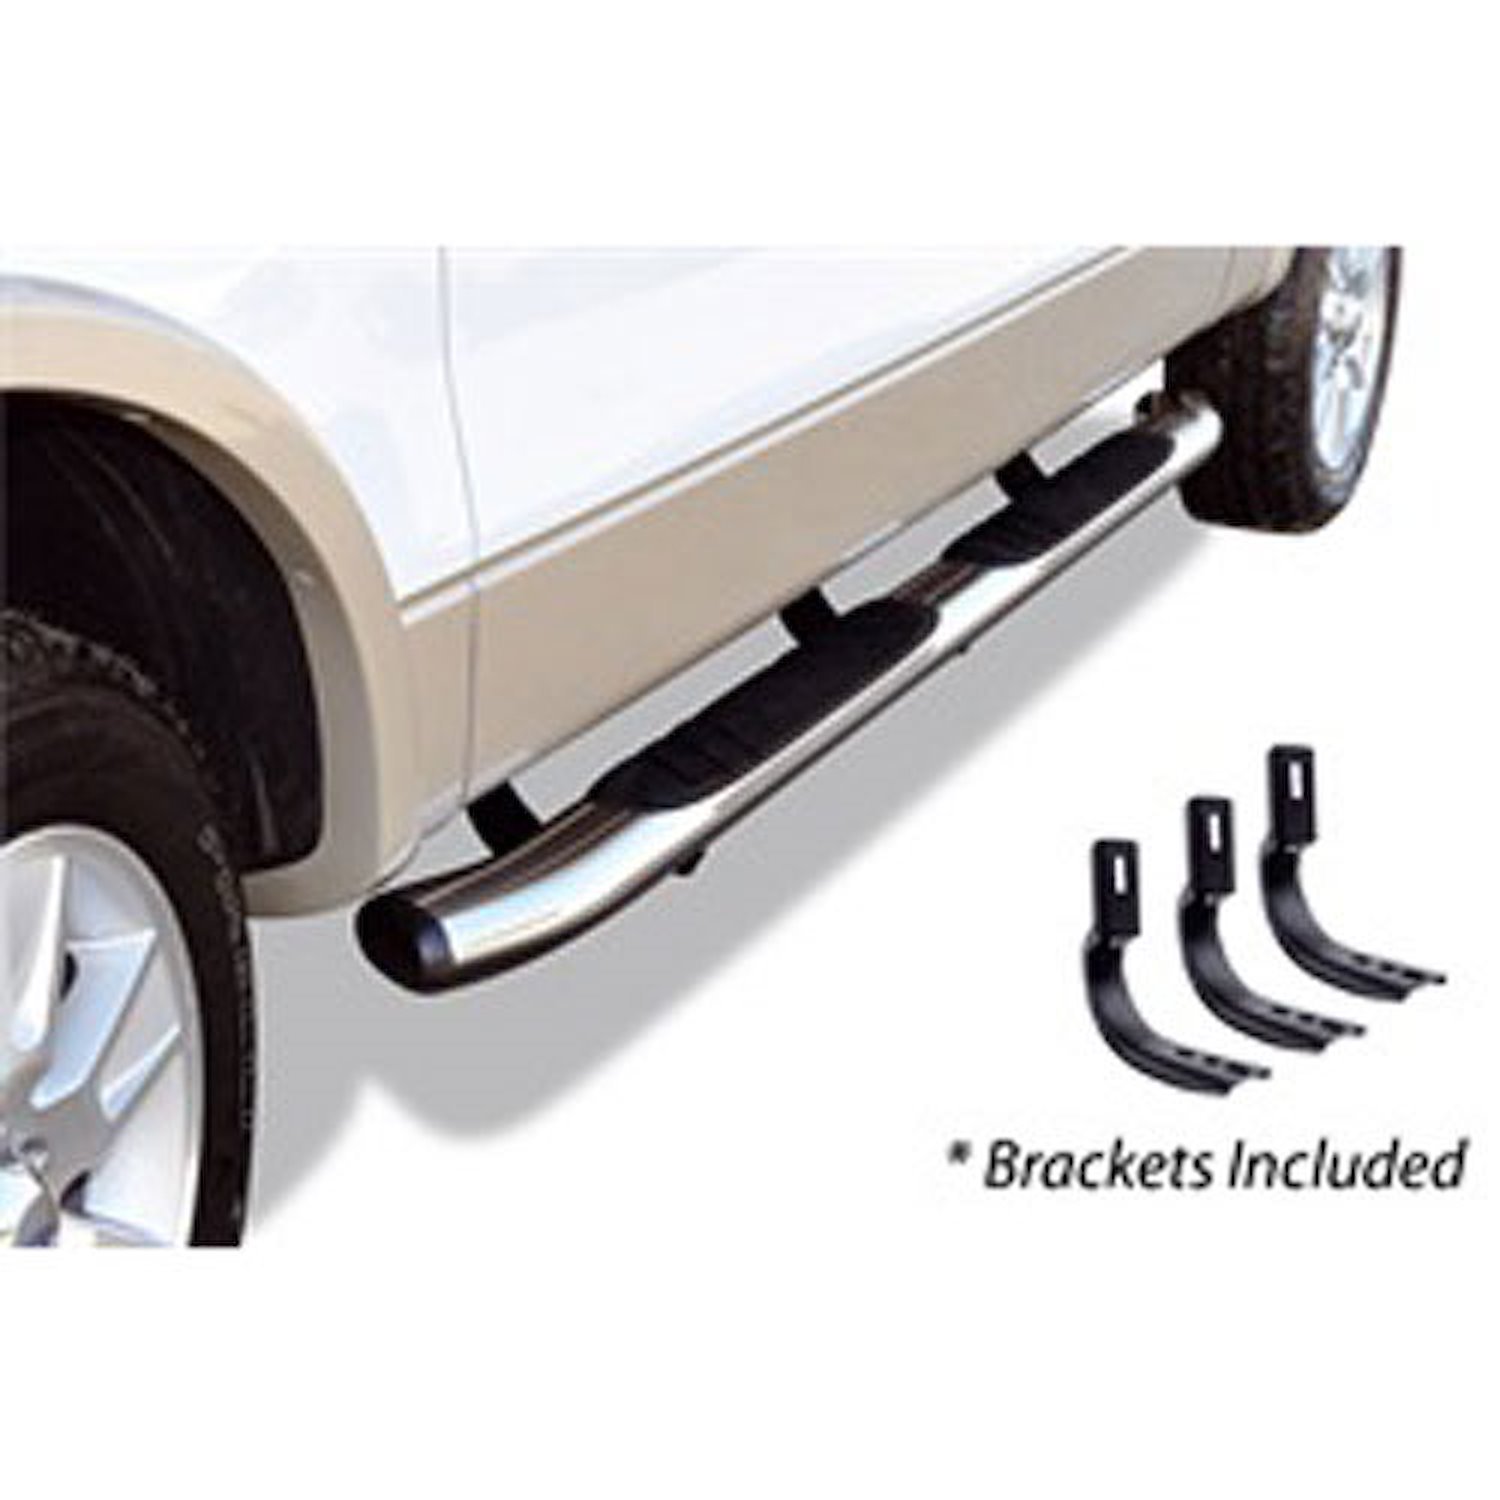 5" OE Xtreme Composite SideSteps Kit 1999-16 Ford F-250 Super Duty/F-350 Super Duty